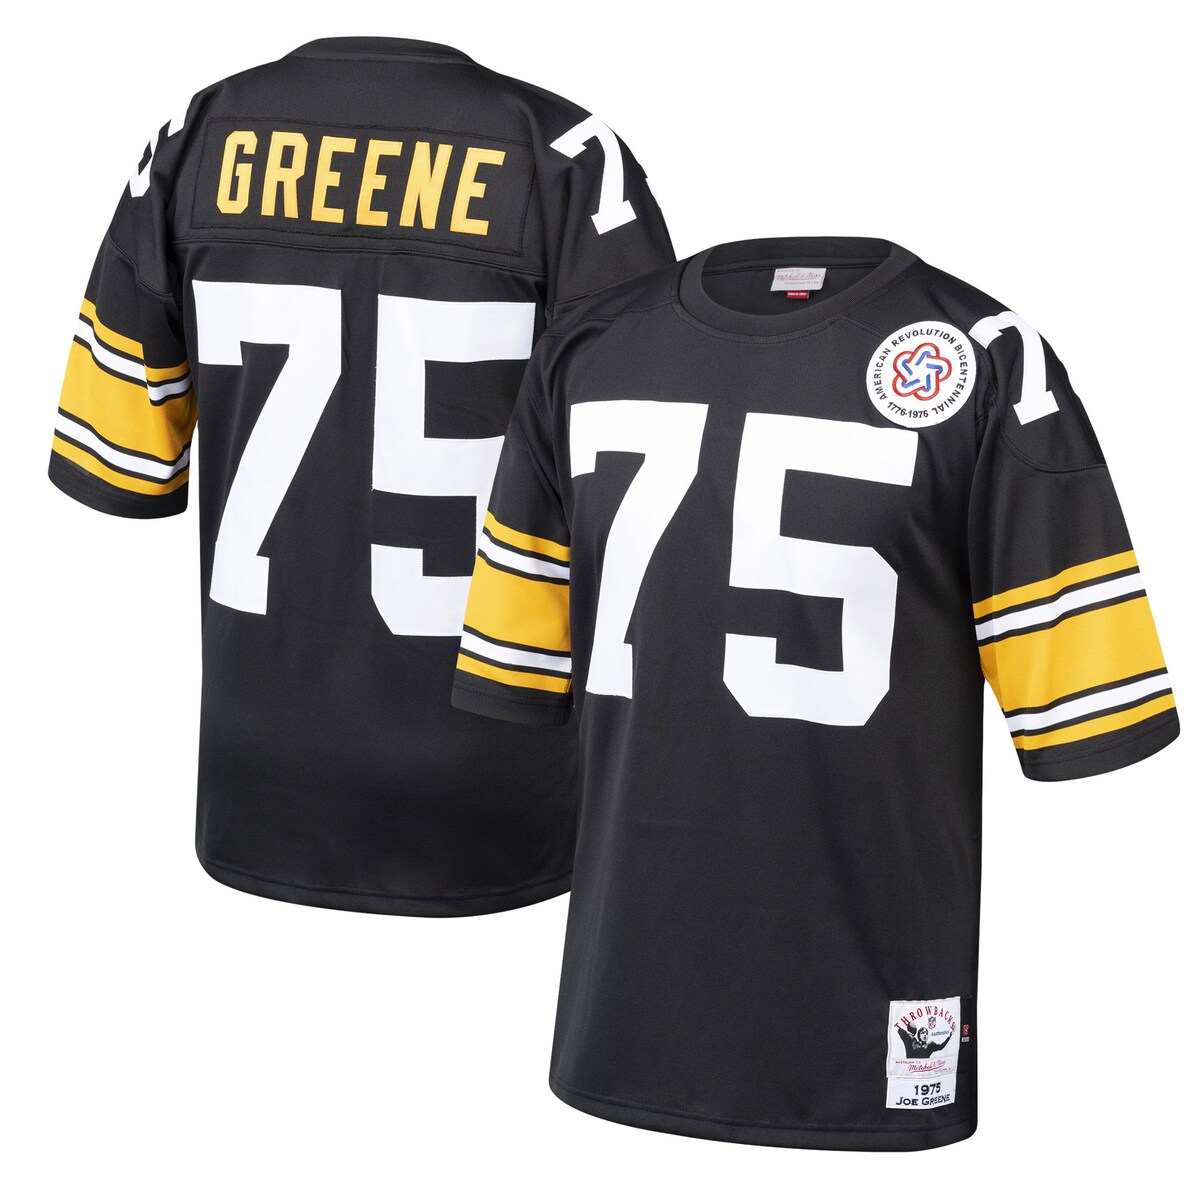 You remember watching Joe Greene dominate opponents with his skill set. Celebrate his career with this Pittsburgh Steelers Authentic retired player jersey from Mitchell & Ness. The picture-perfect design will remind you of the days when your favorite player patrolled the gridiron. When you wear this Pittsburgh Steelers jersey, all eyes will be on you.Brand: Mitchell & NessMachine wash, line dryImportedOfficially licensedMaterial: 100% Polyester